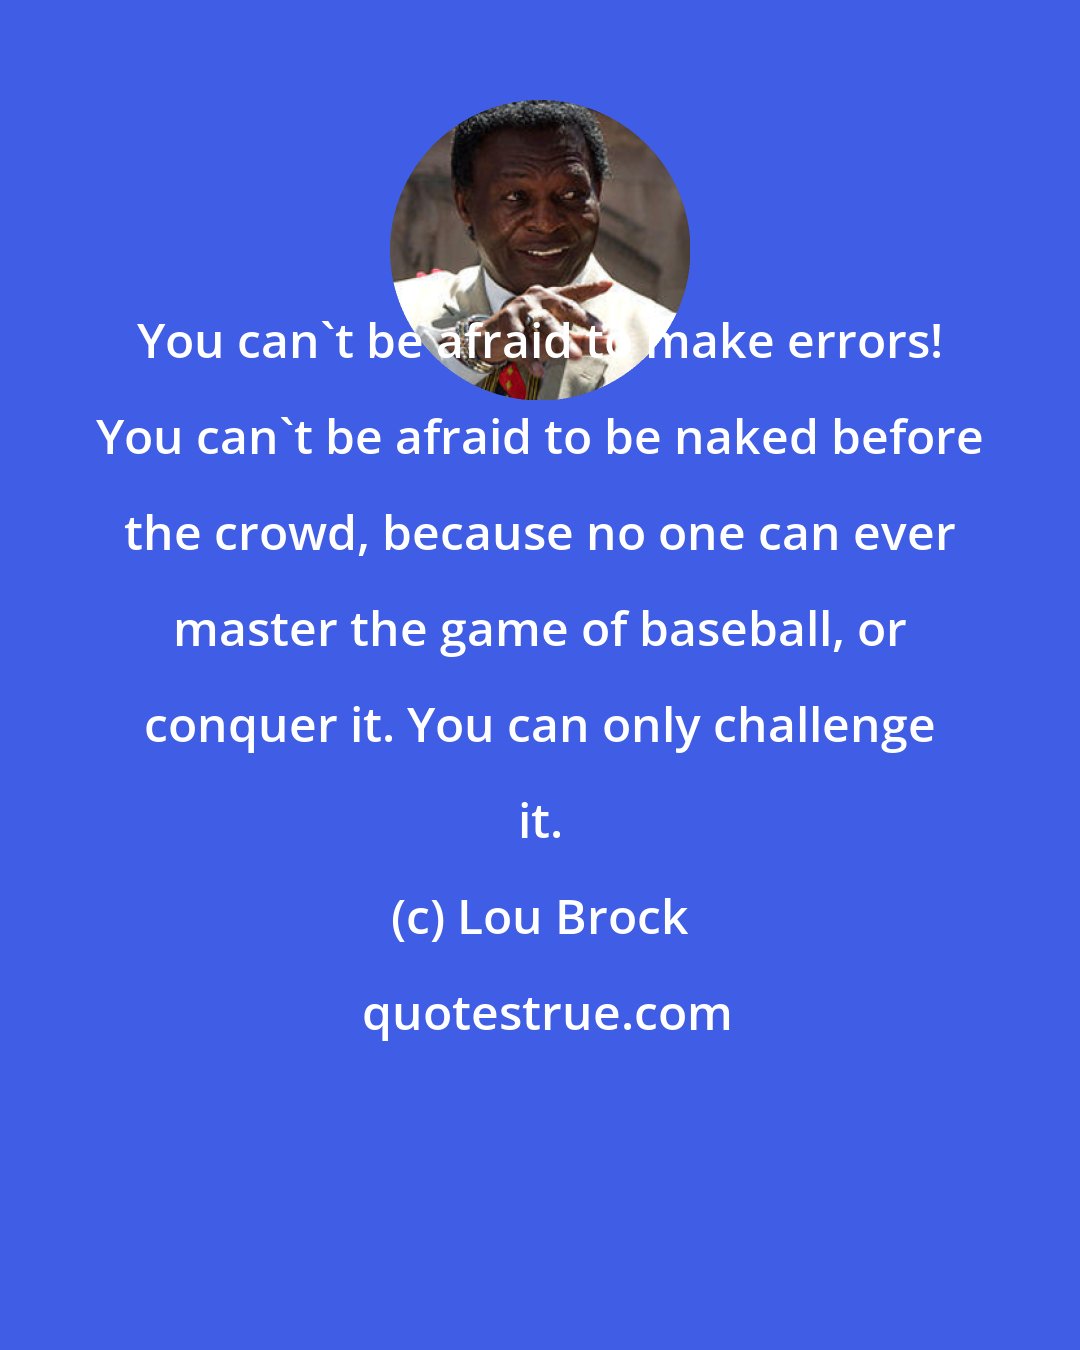 Lou Brock: You can't be afraid to make errors! You can't be afraid to be naked before the crowd, because no one can ever master the game of baseball, or conquer it. You can only challenge it.